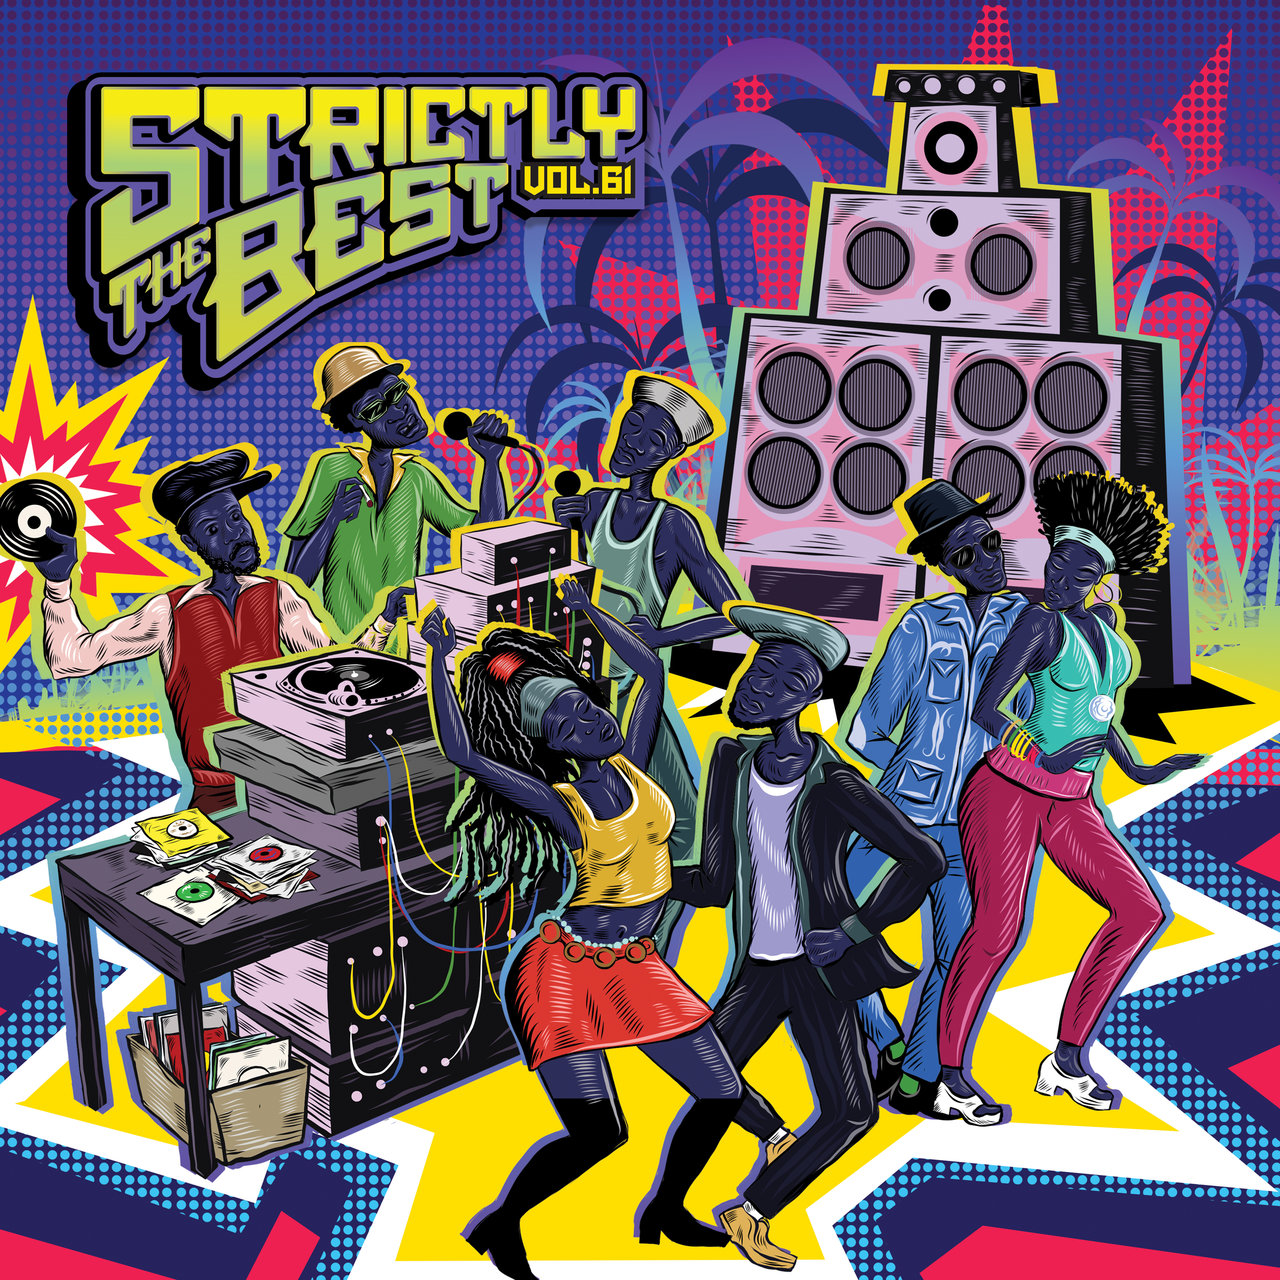 Strictly The Best Vol. 61 (Cover)